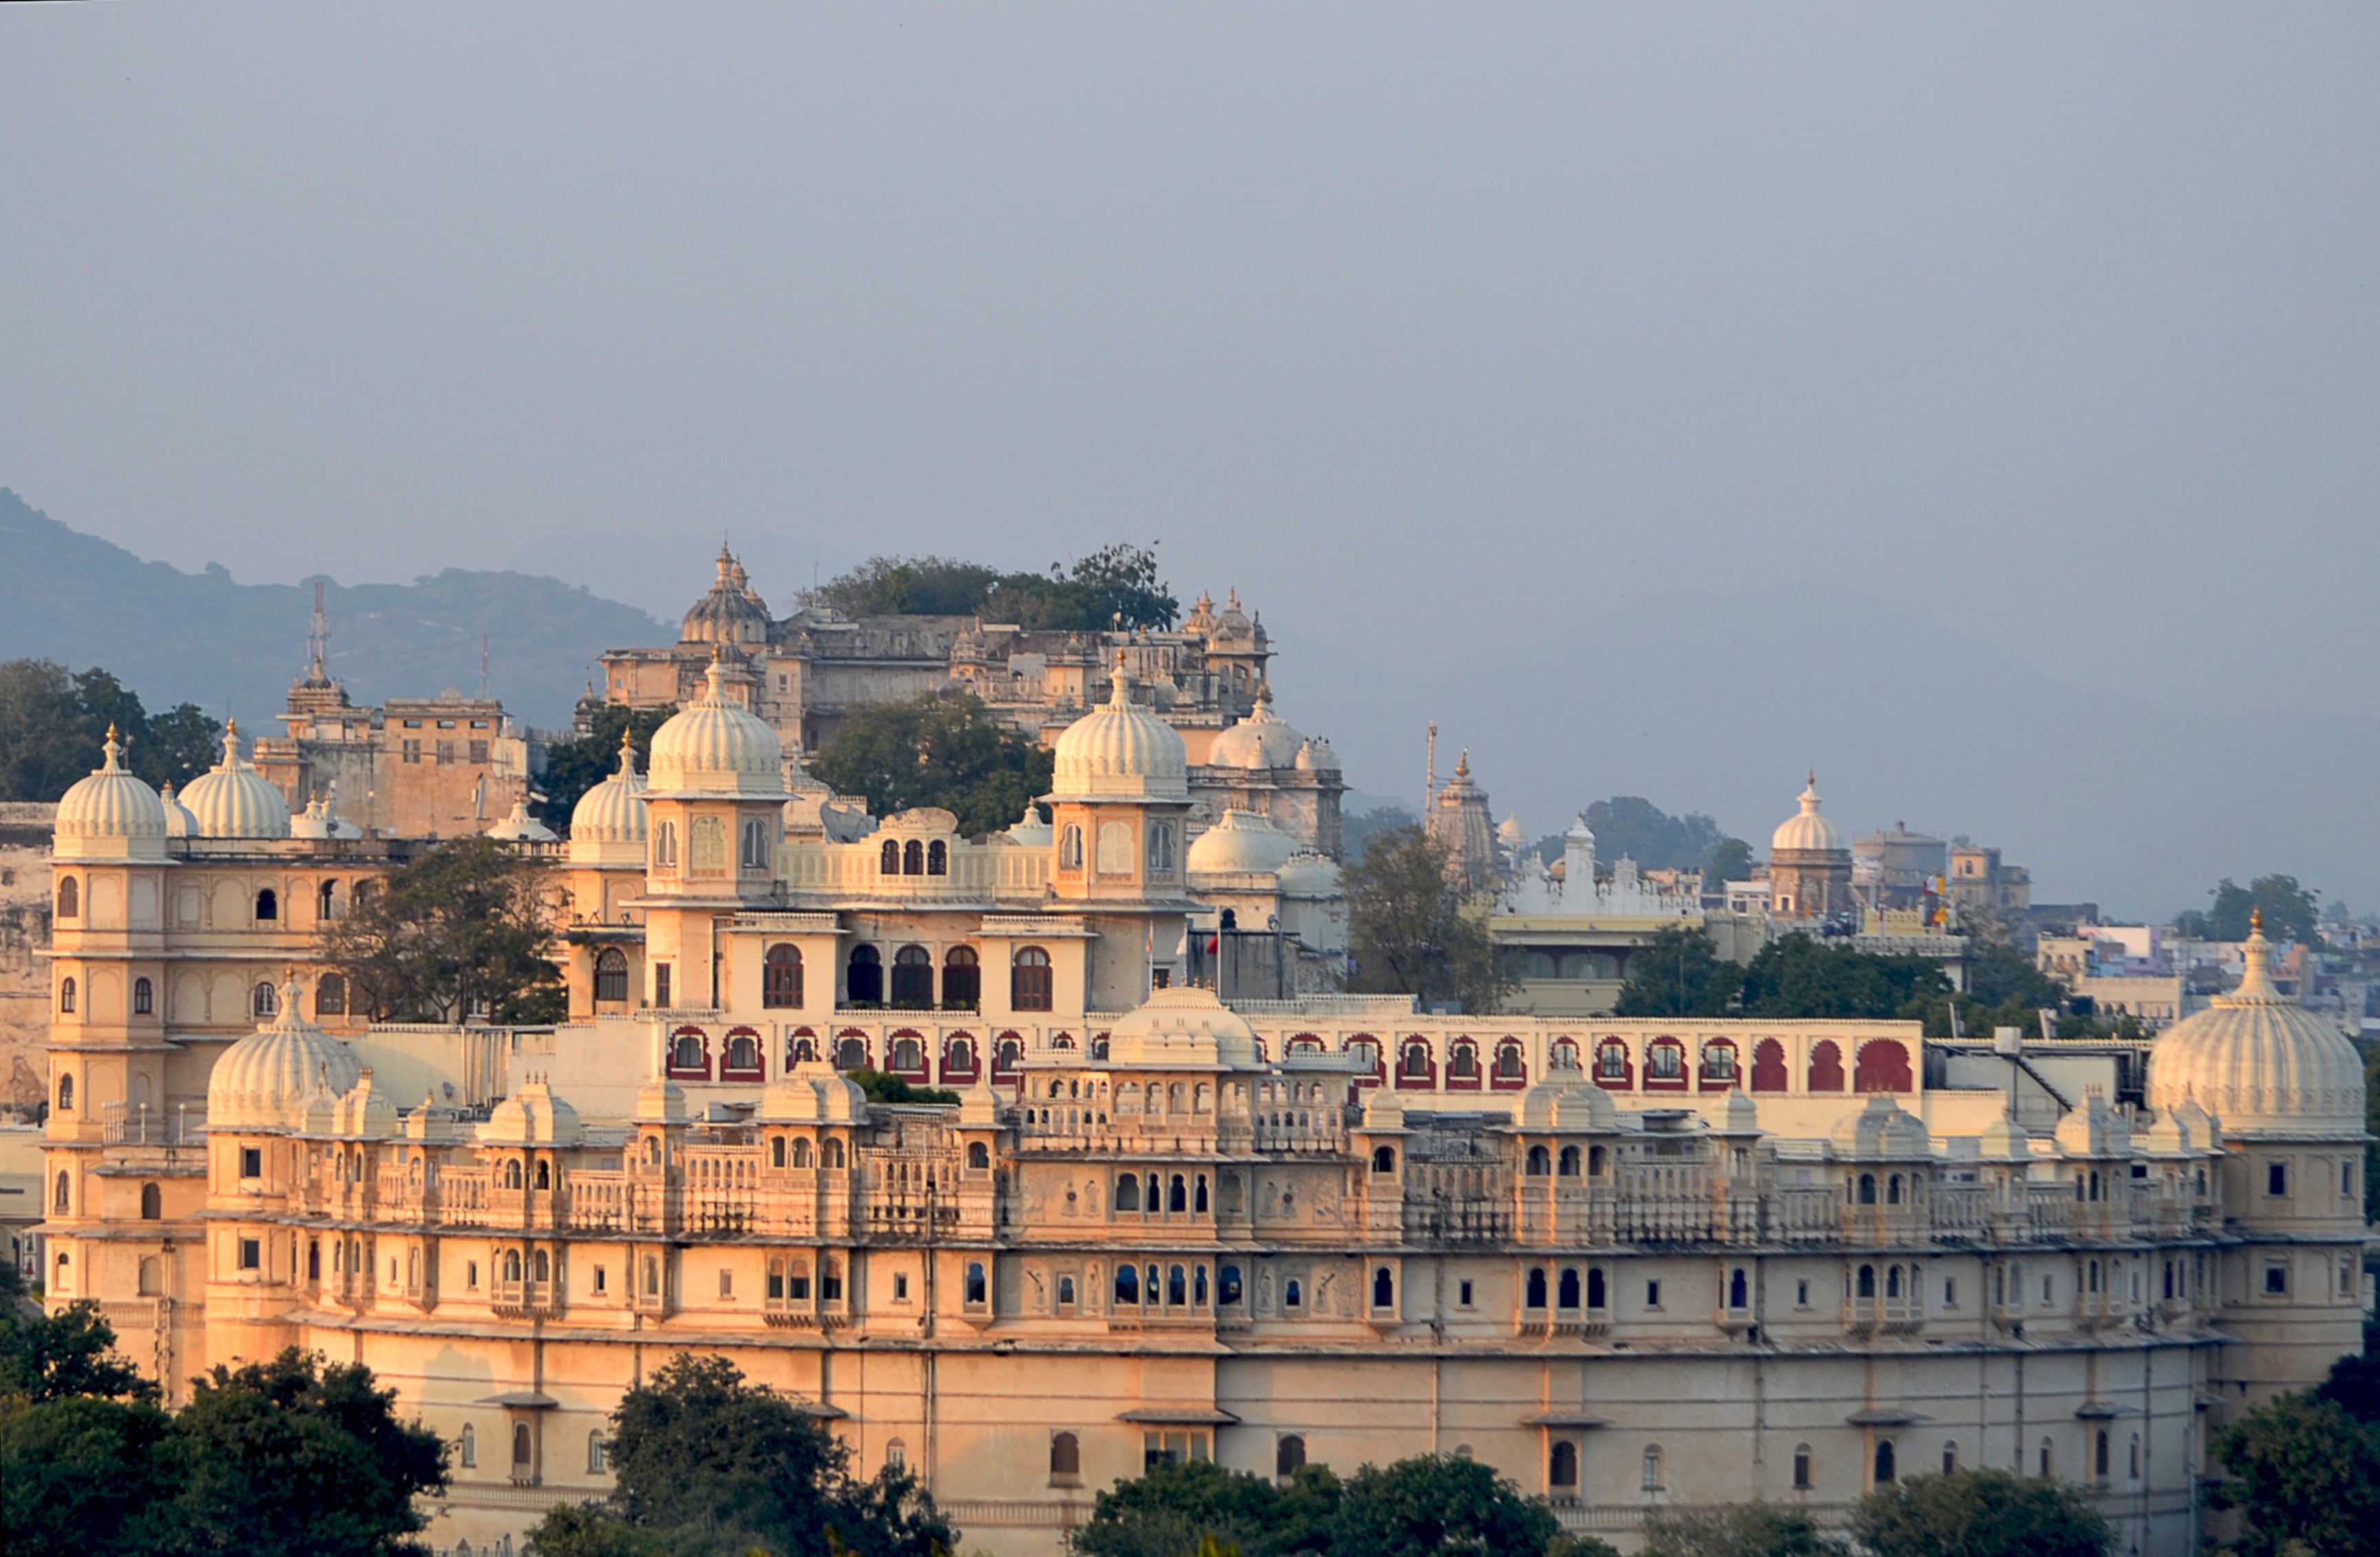 This wedding venue offers a magnificent view and is situated on the shores of Lake Pichola.(Wikepedia )